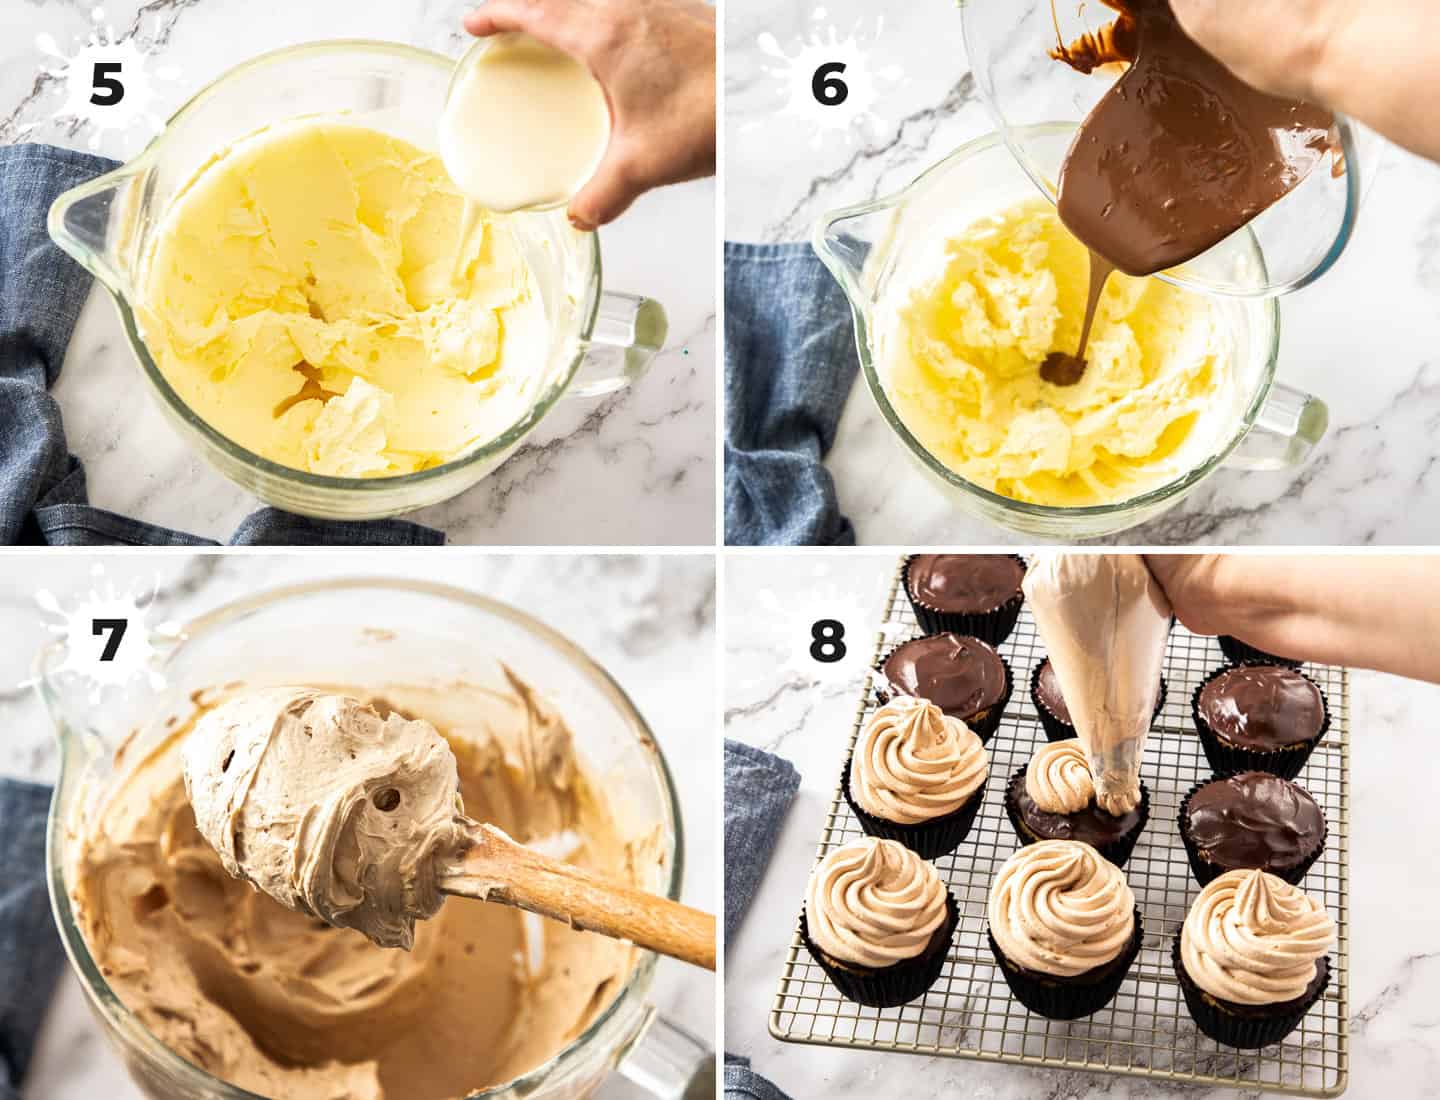 4 images showing the steps to making milk chocolate frosting.